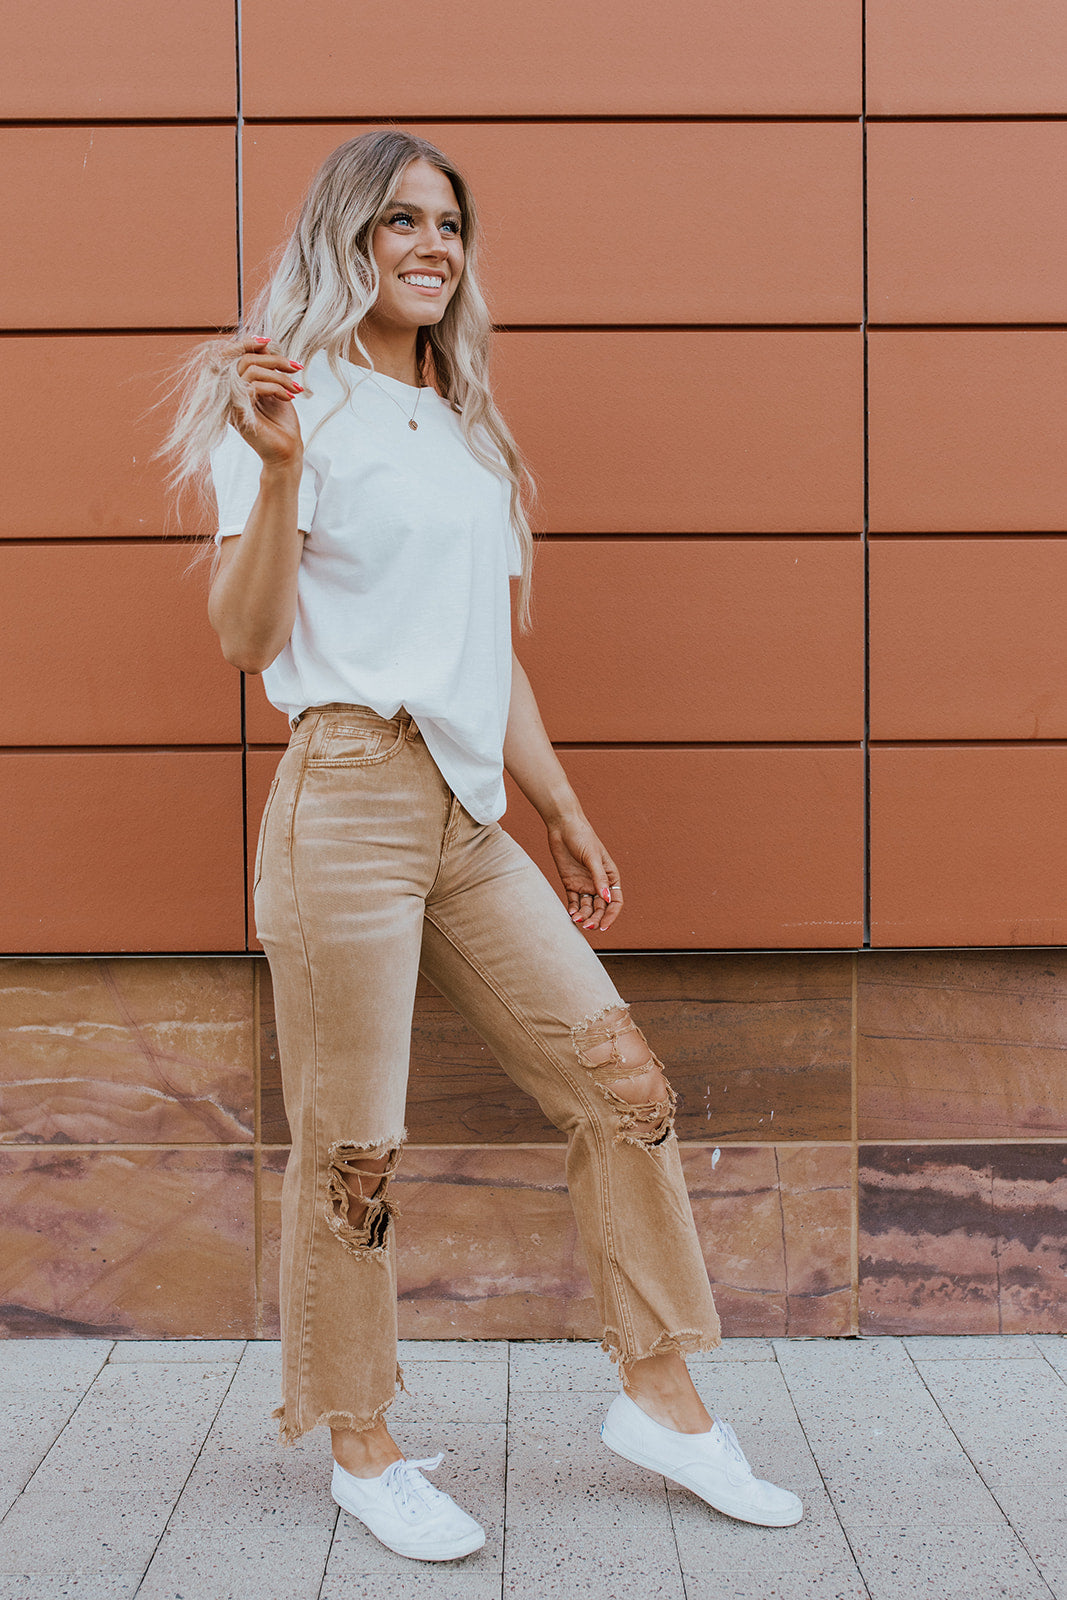 THE 90'S FLARE JEANS IN DISTRESSED COPPER BY VERVET